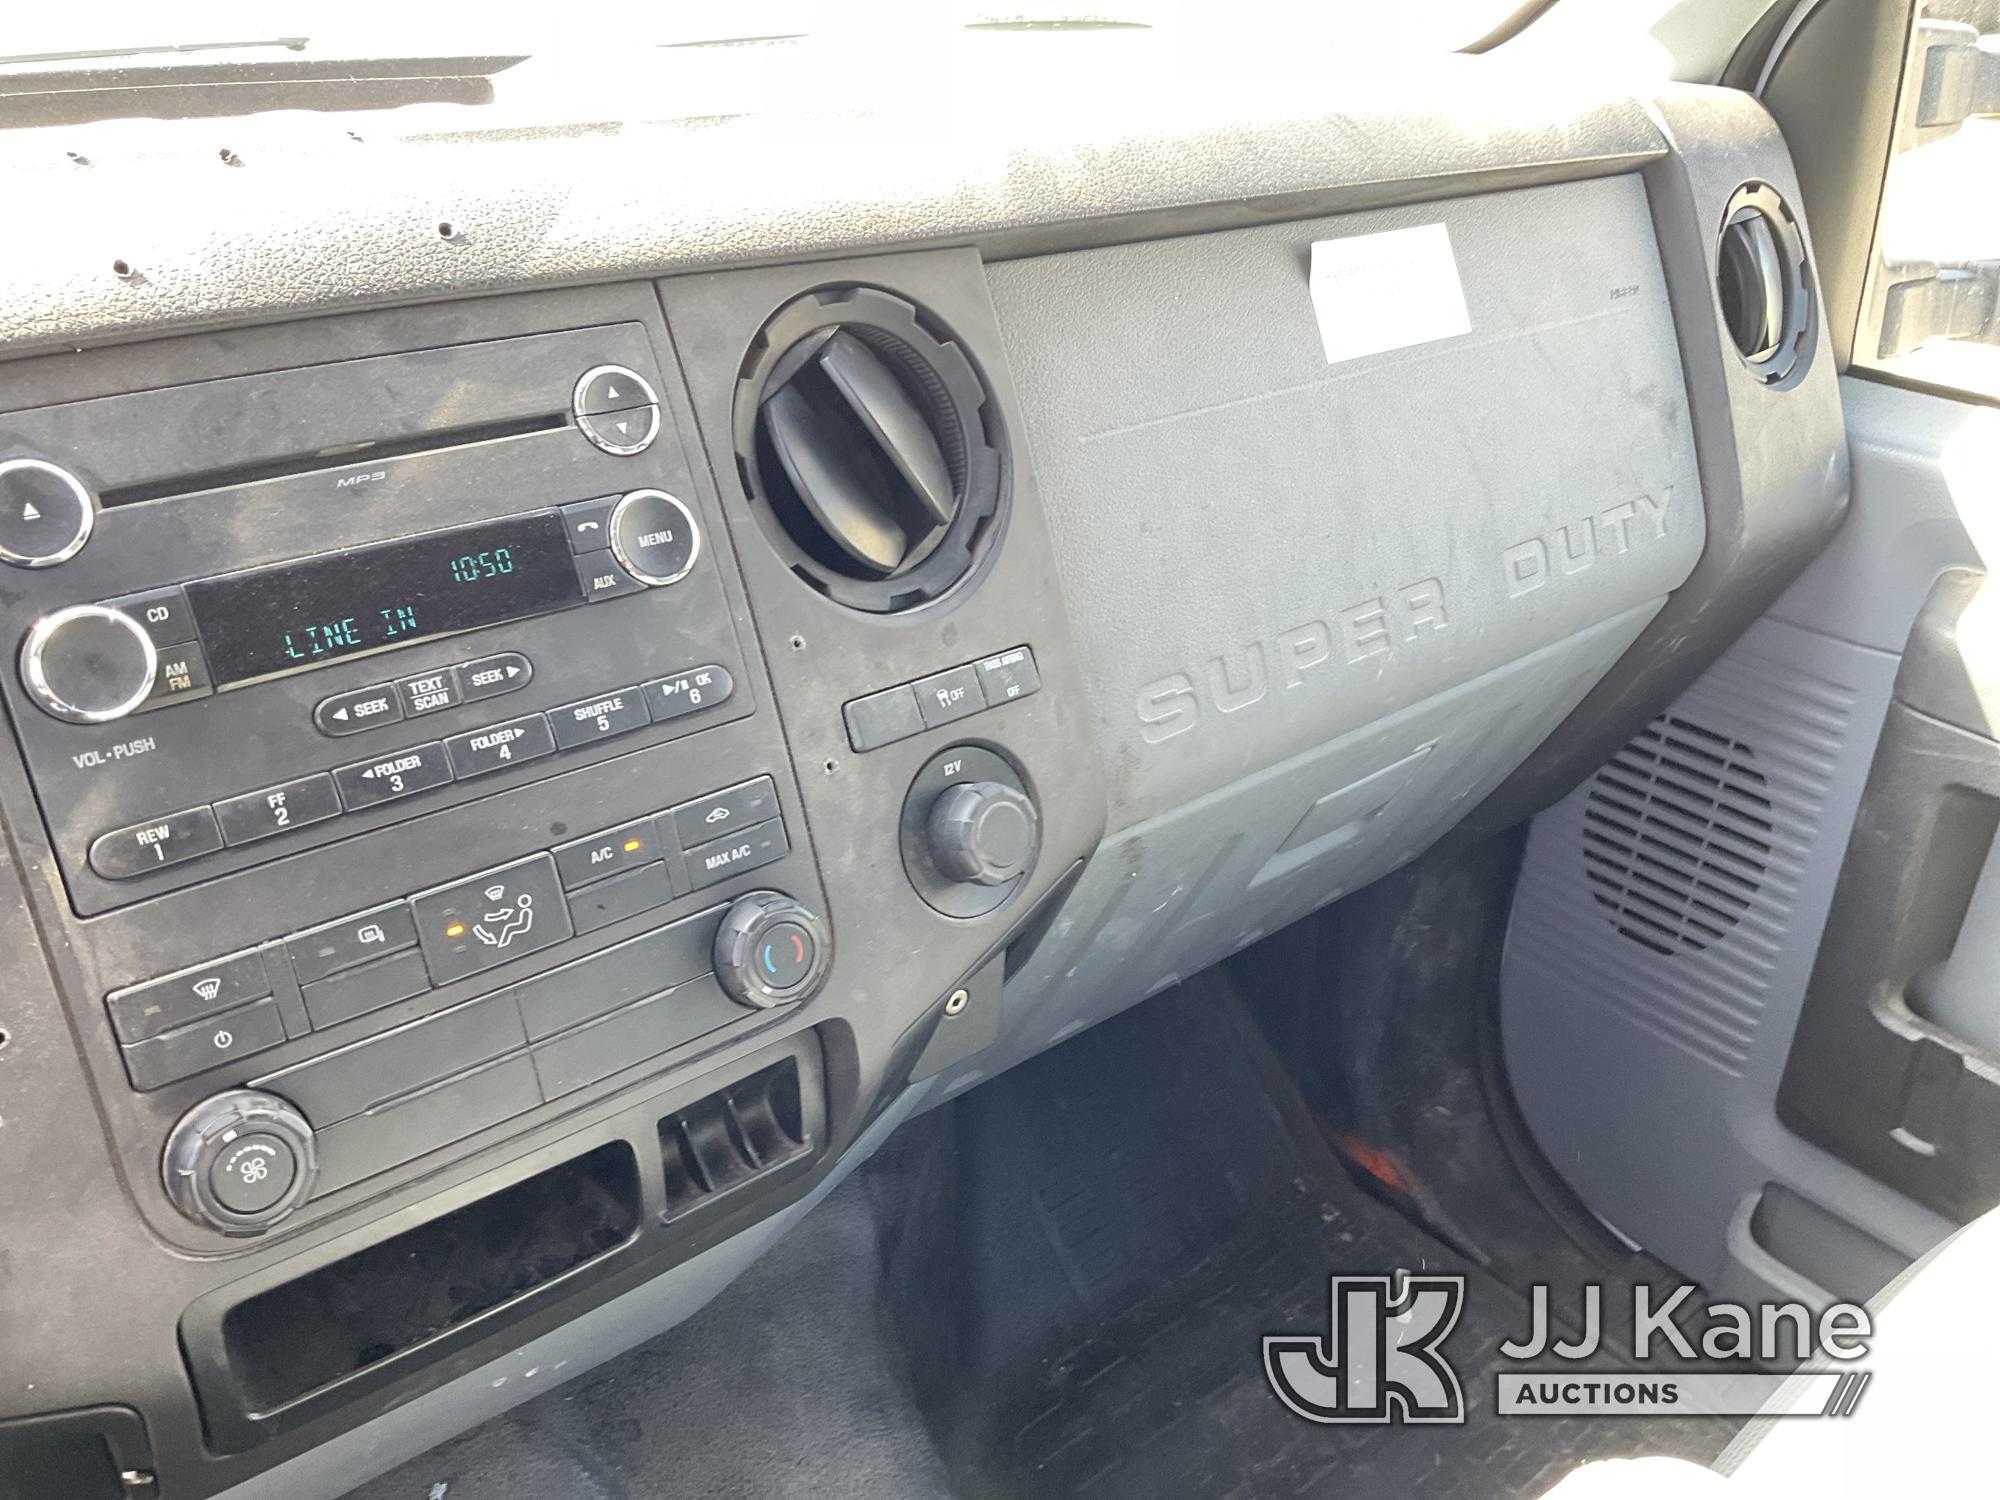 (Hondo, TX) 2013 Ford F250 4x4 Extended-Cab Pickup Truck Runs & Moves) (Check Engine Light Is On